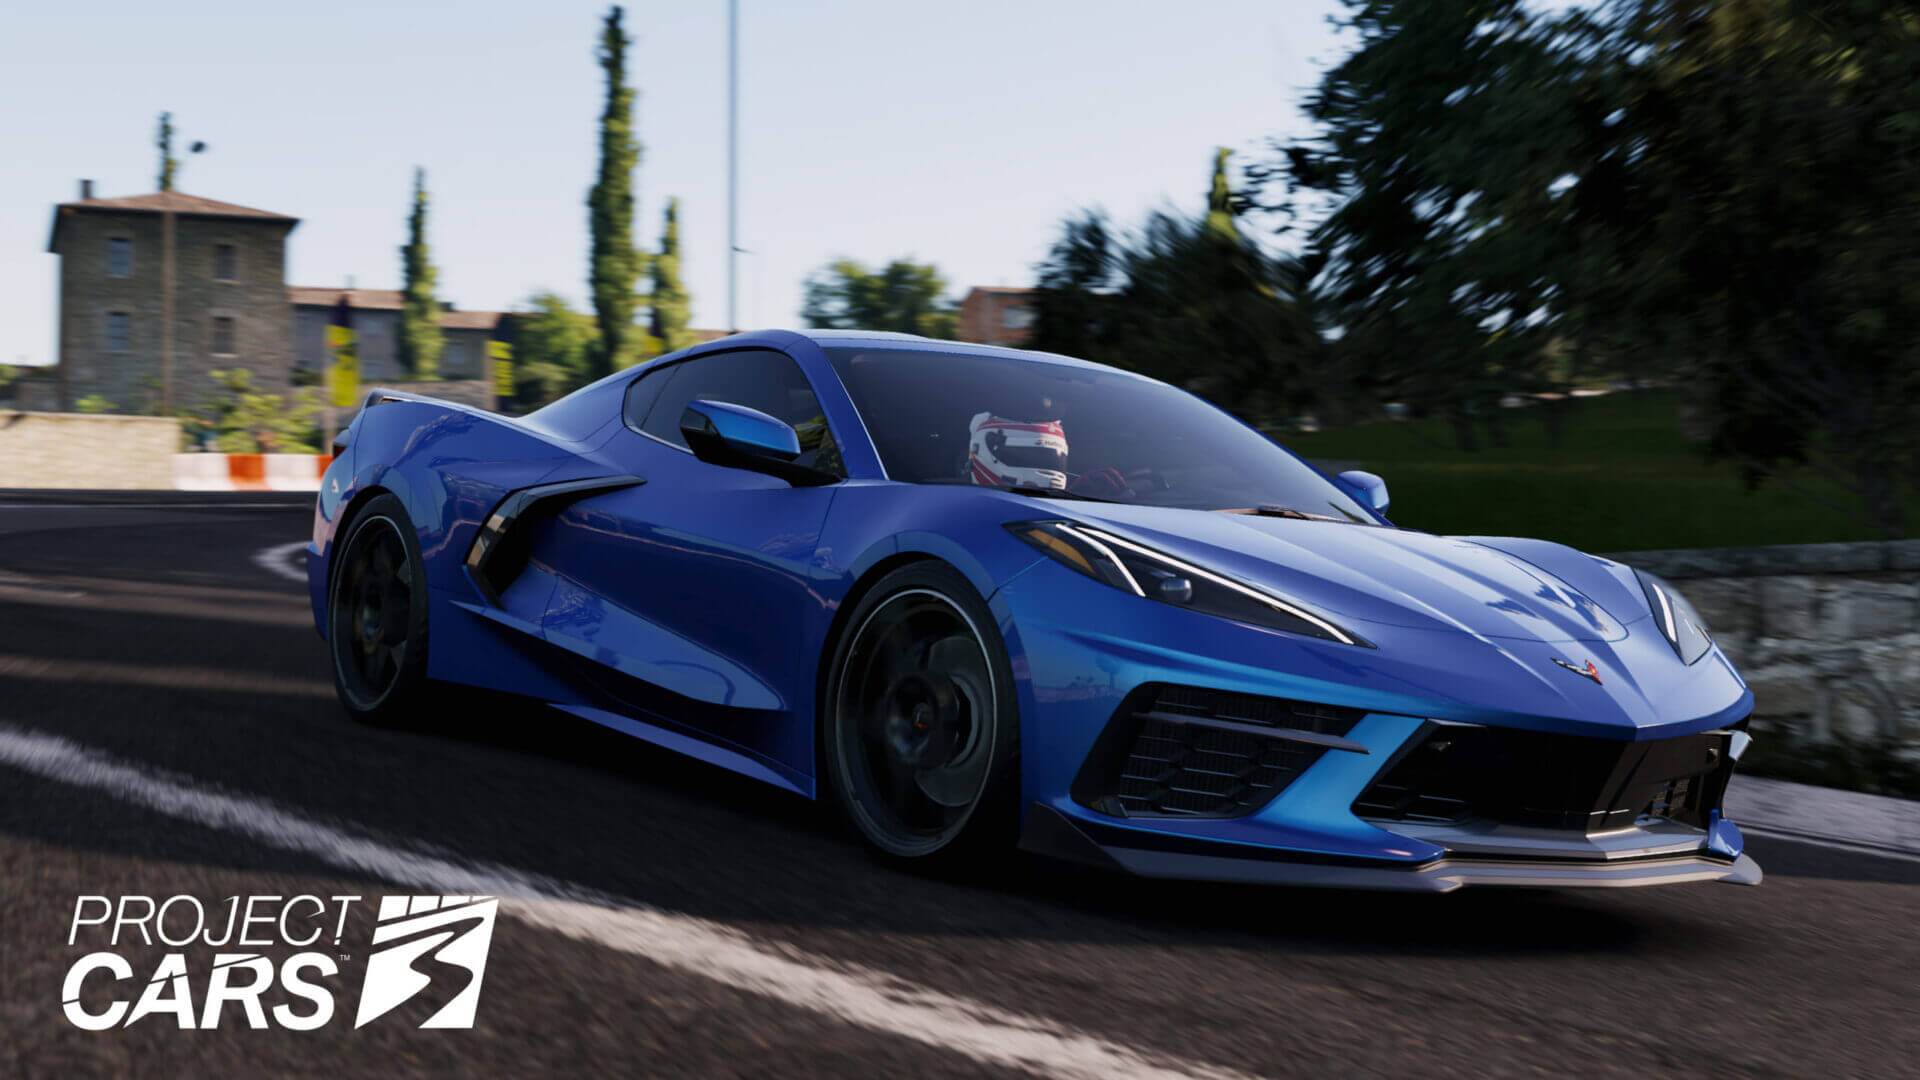 Gaming review: Project CARS 3 is totally remixed